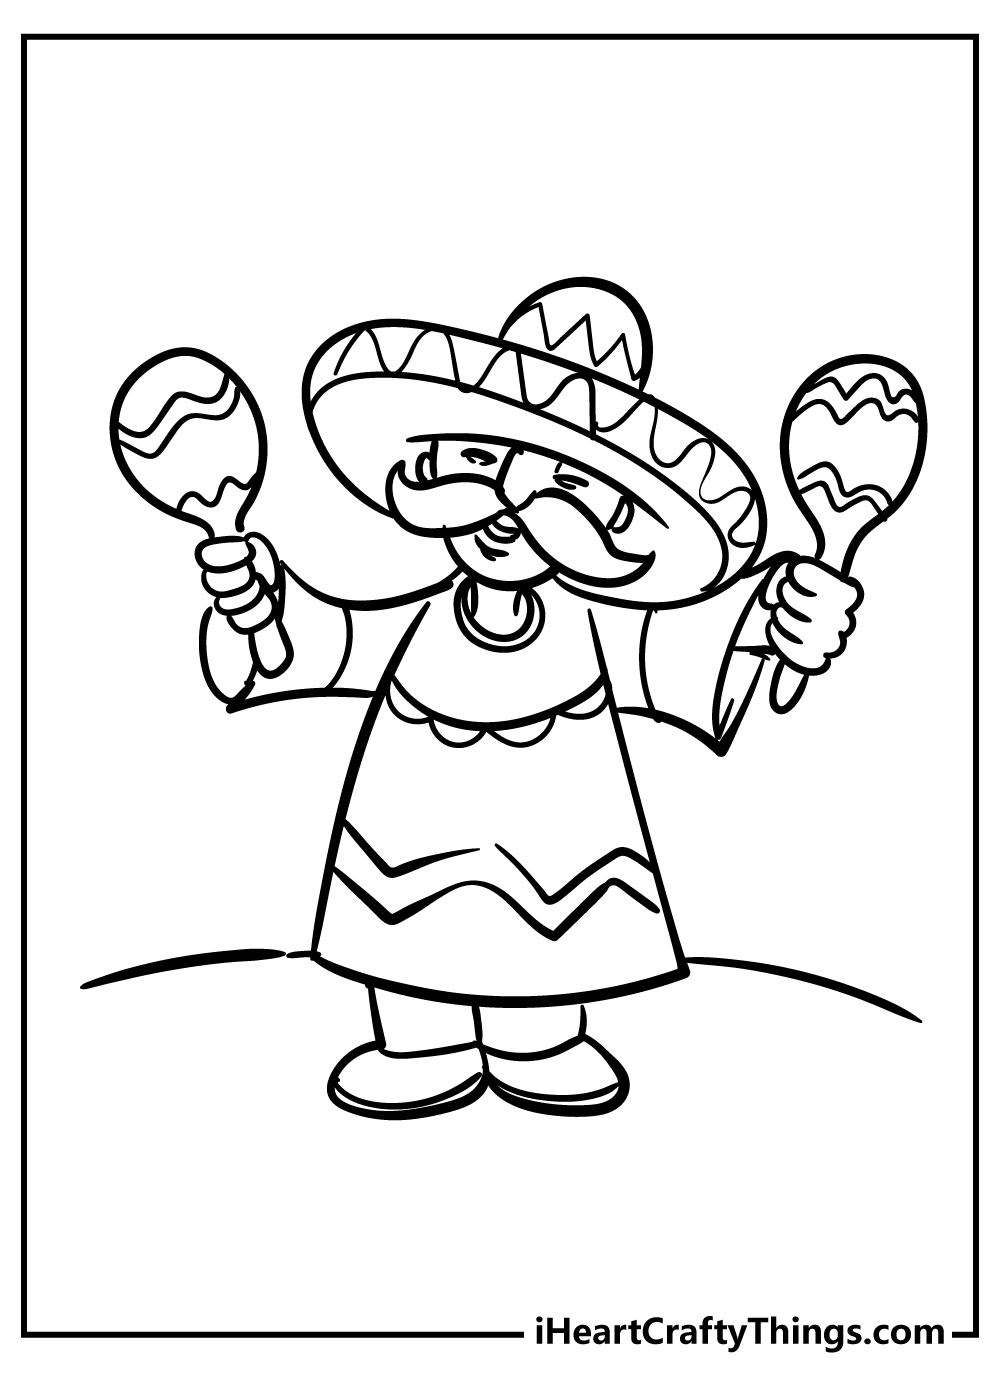 Mexican Coloring Pages for preschoolers free printable